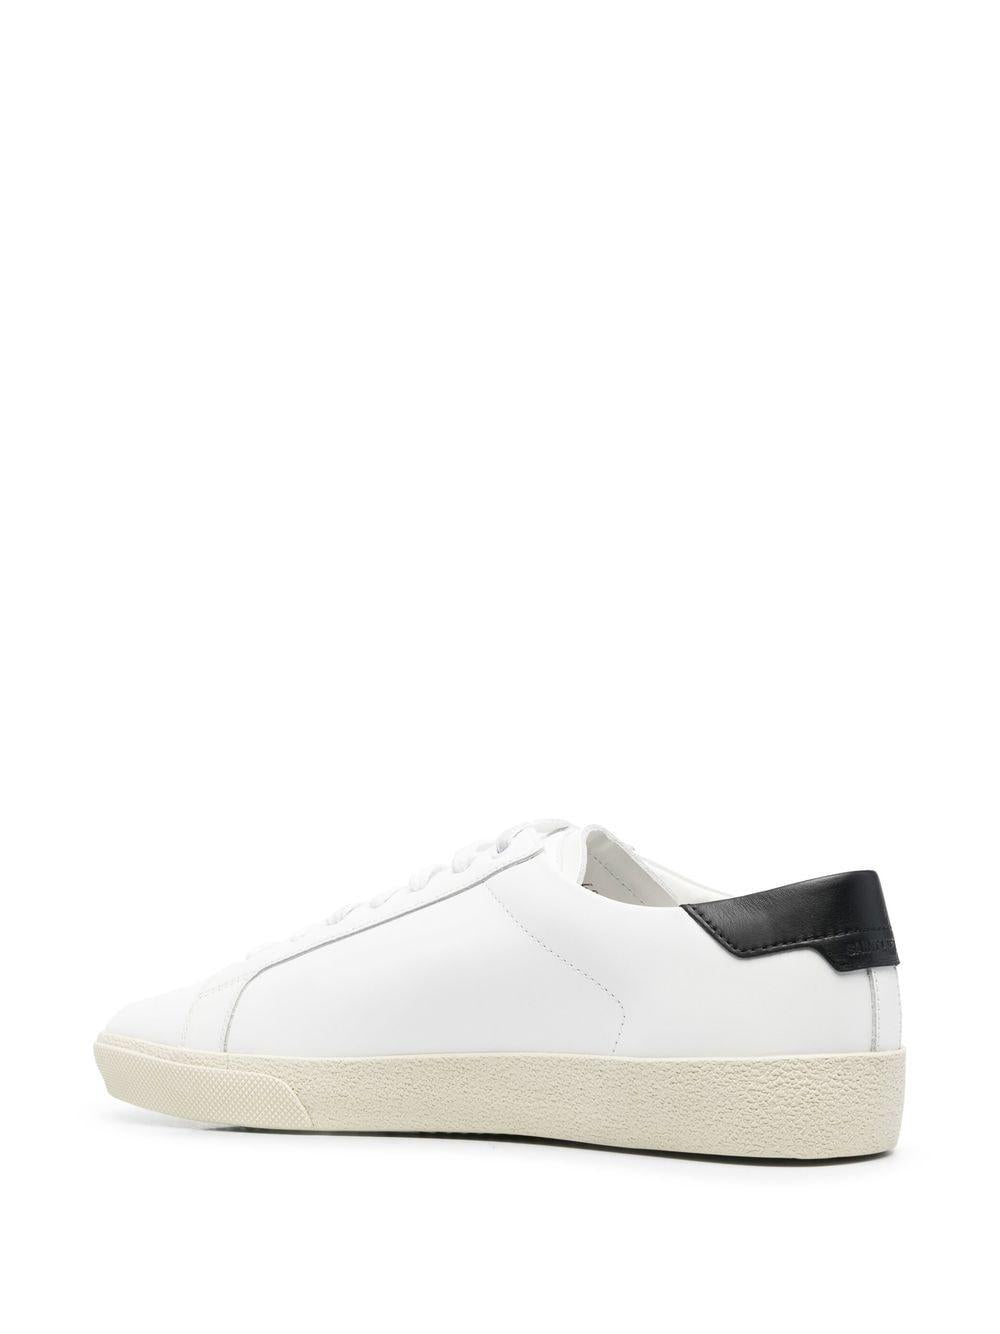 Men's White Low-top Sneakers with Calfskin and Leather Detailing